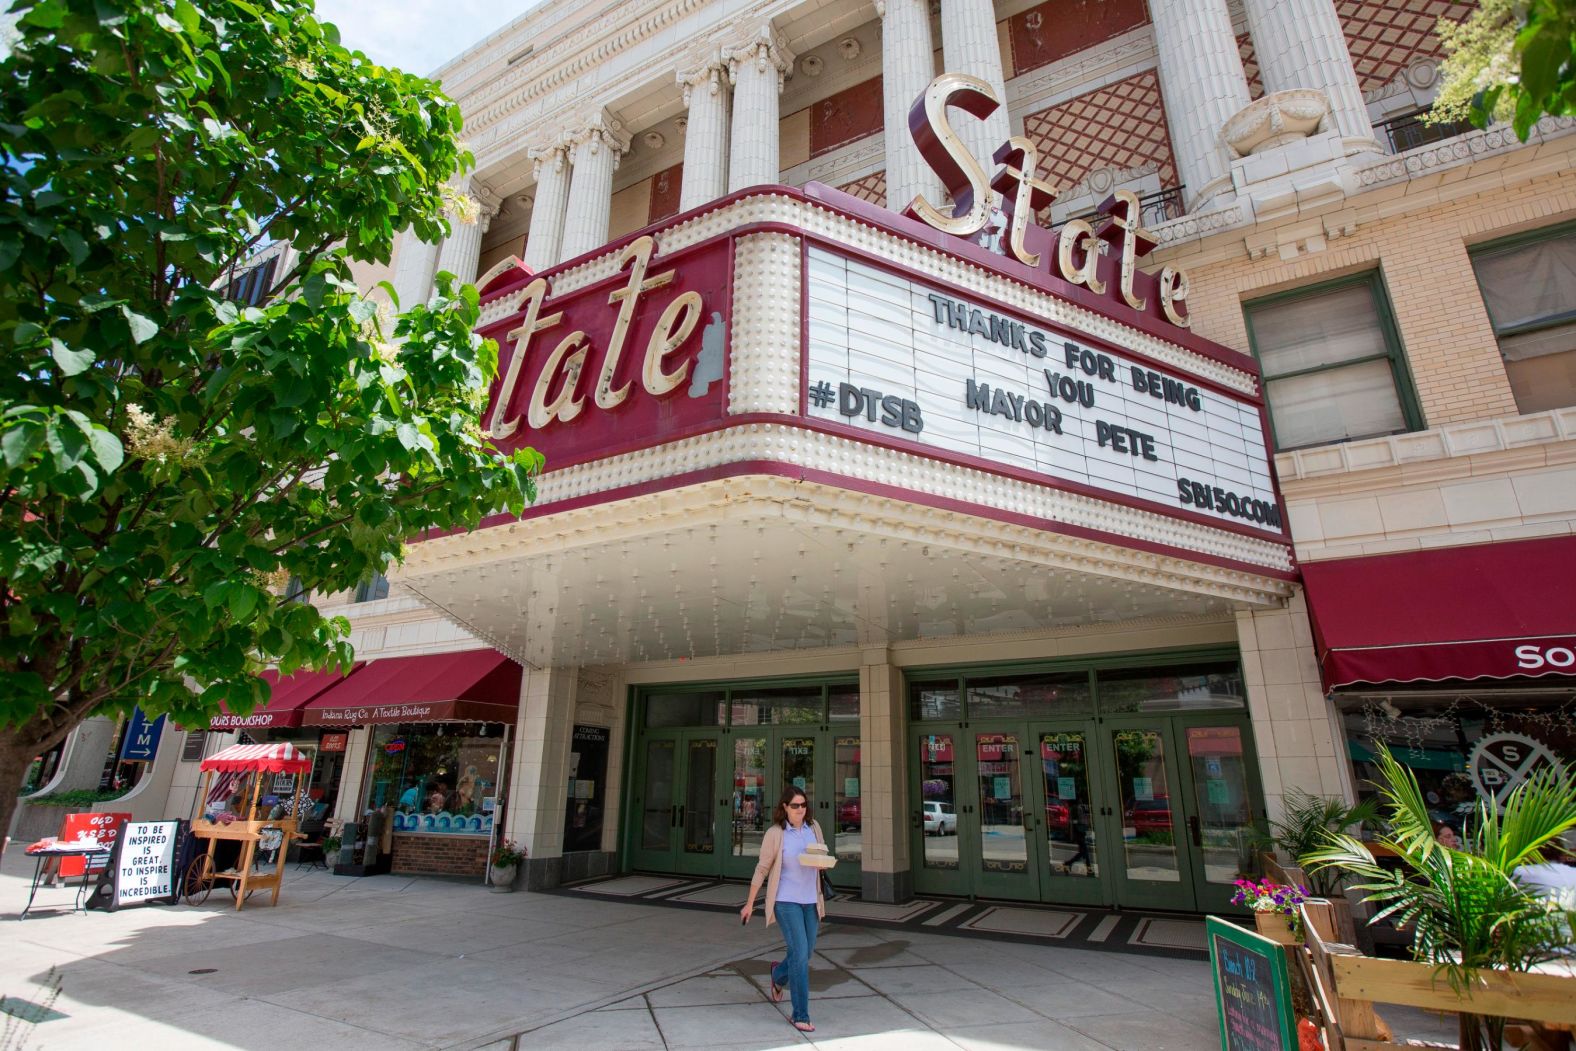 The State Theater in downtown South Bend shows its support for "Mayor Pete" after Buttigieg <a href="index.php?page=&url=https%3A%2F%2Fwww.southbendtribune.com%2Fnews%2Flocal%2Fsouth-bend-mayor-why-coming-out-matters%2Farticle_4dce0d12-1415-11e5-83c0-739eebd623ee.html" target="_blank" target="_blank">came out</a> as gay in June 2015.